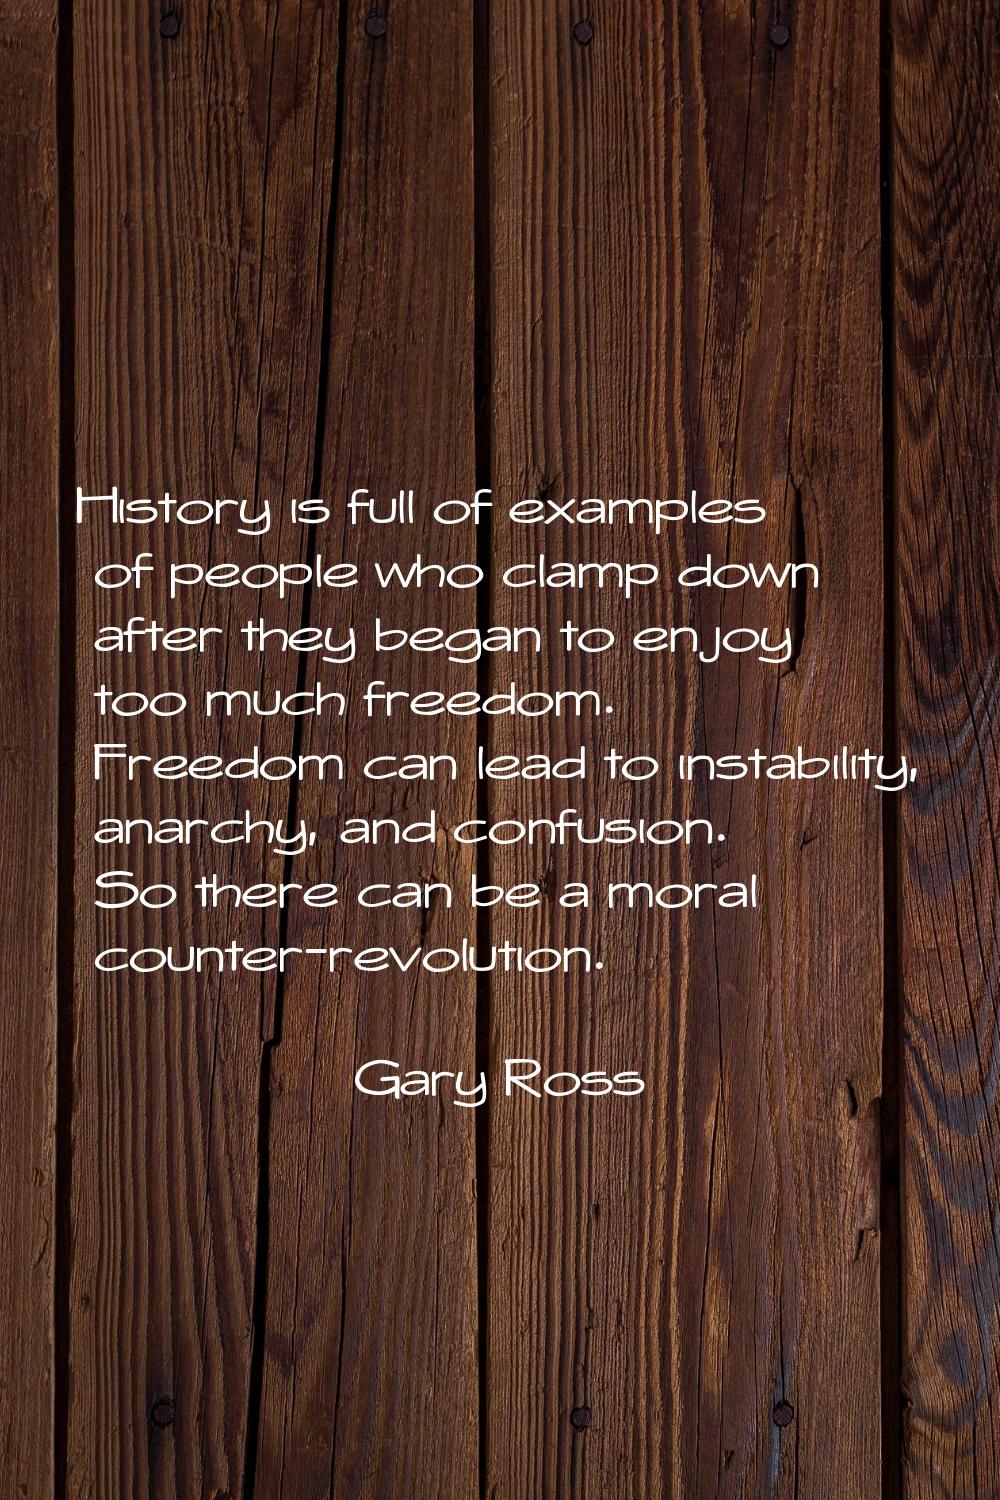 History is full of examples of people who clamp down after they began to enjoy too much freedom. Fr